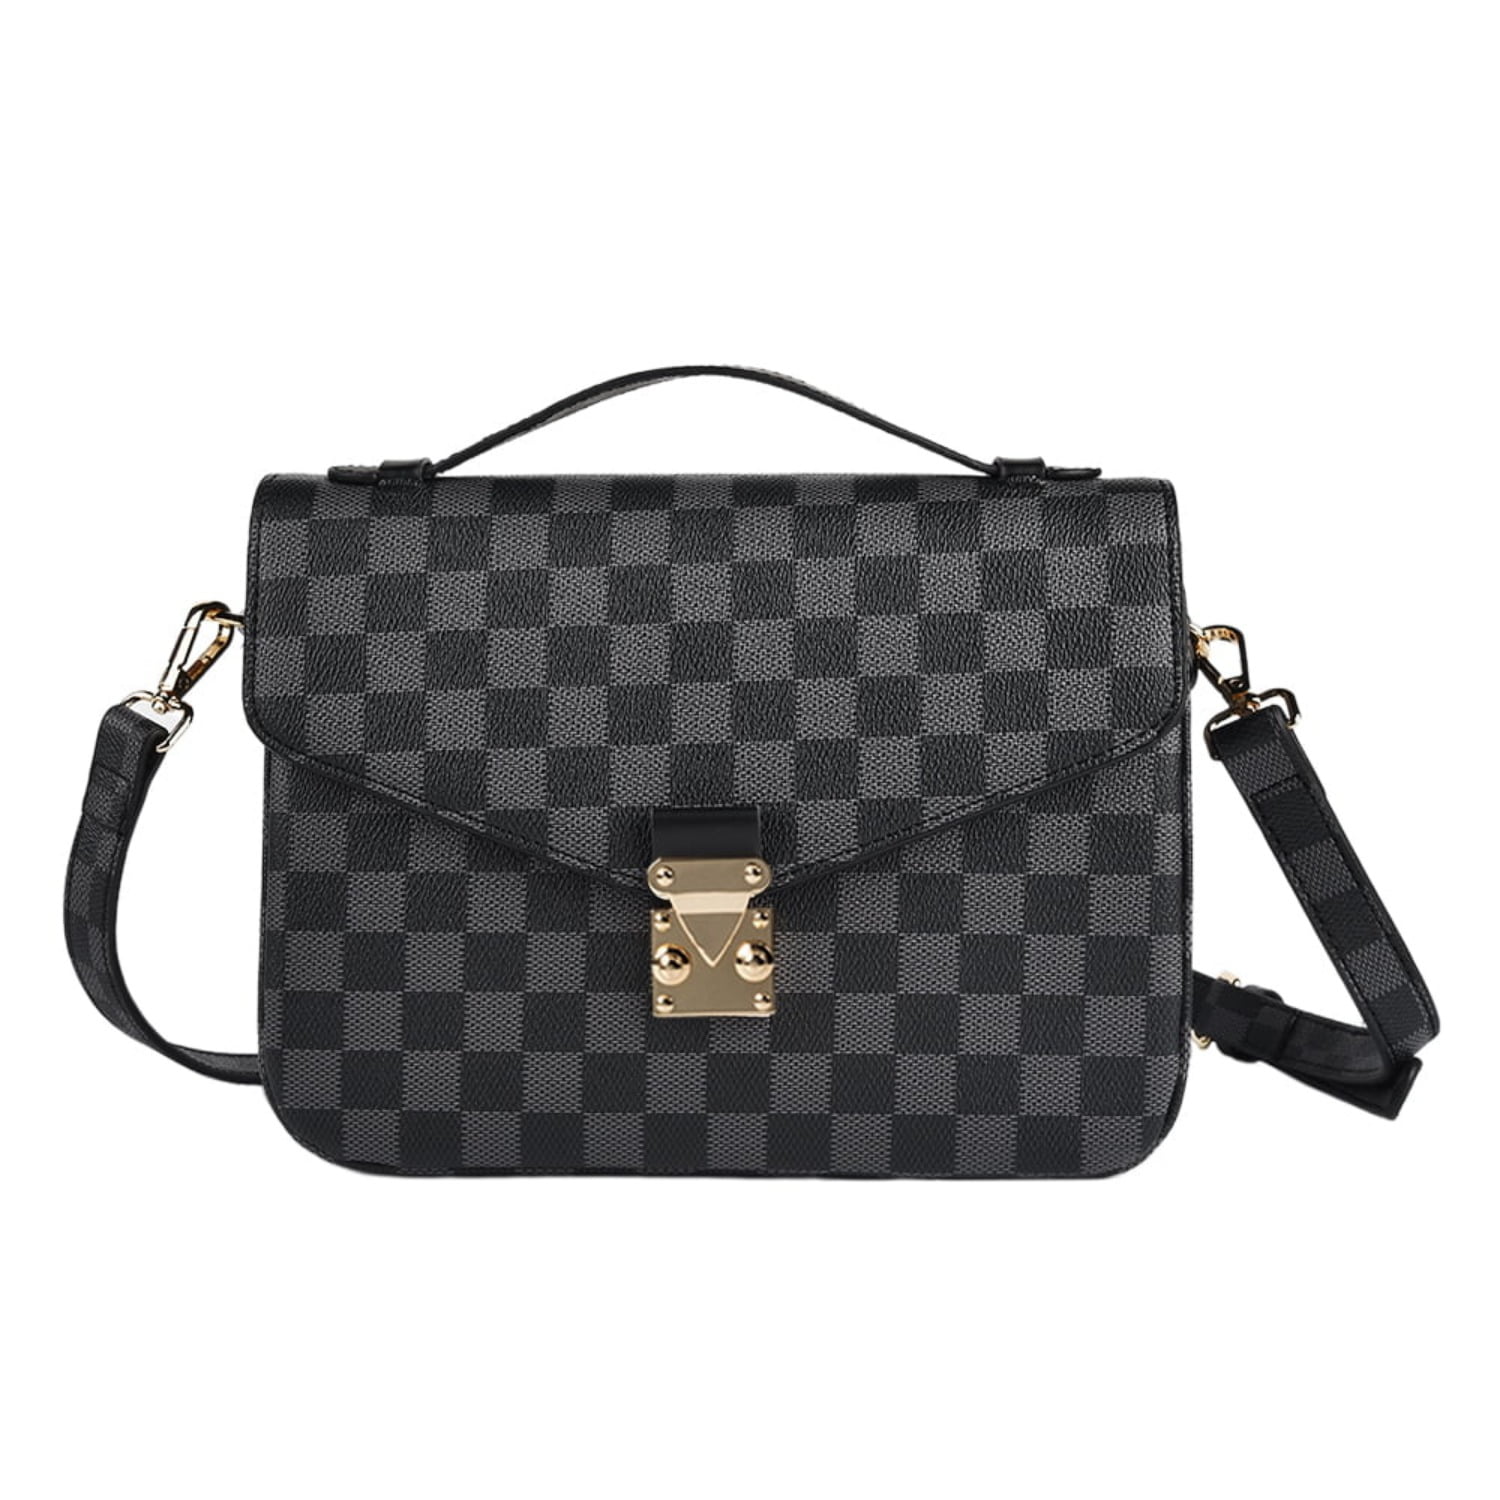 MK Gdledy Checkered Cross Body Bag - Womens Purse Checkered Evening Bag  Ladies Shoulder Bags - PU Vegan Leather 